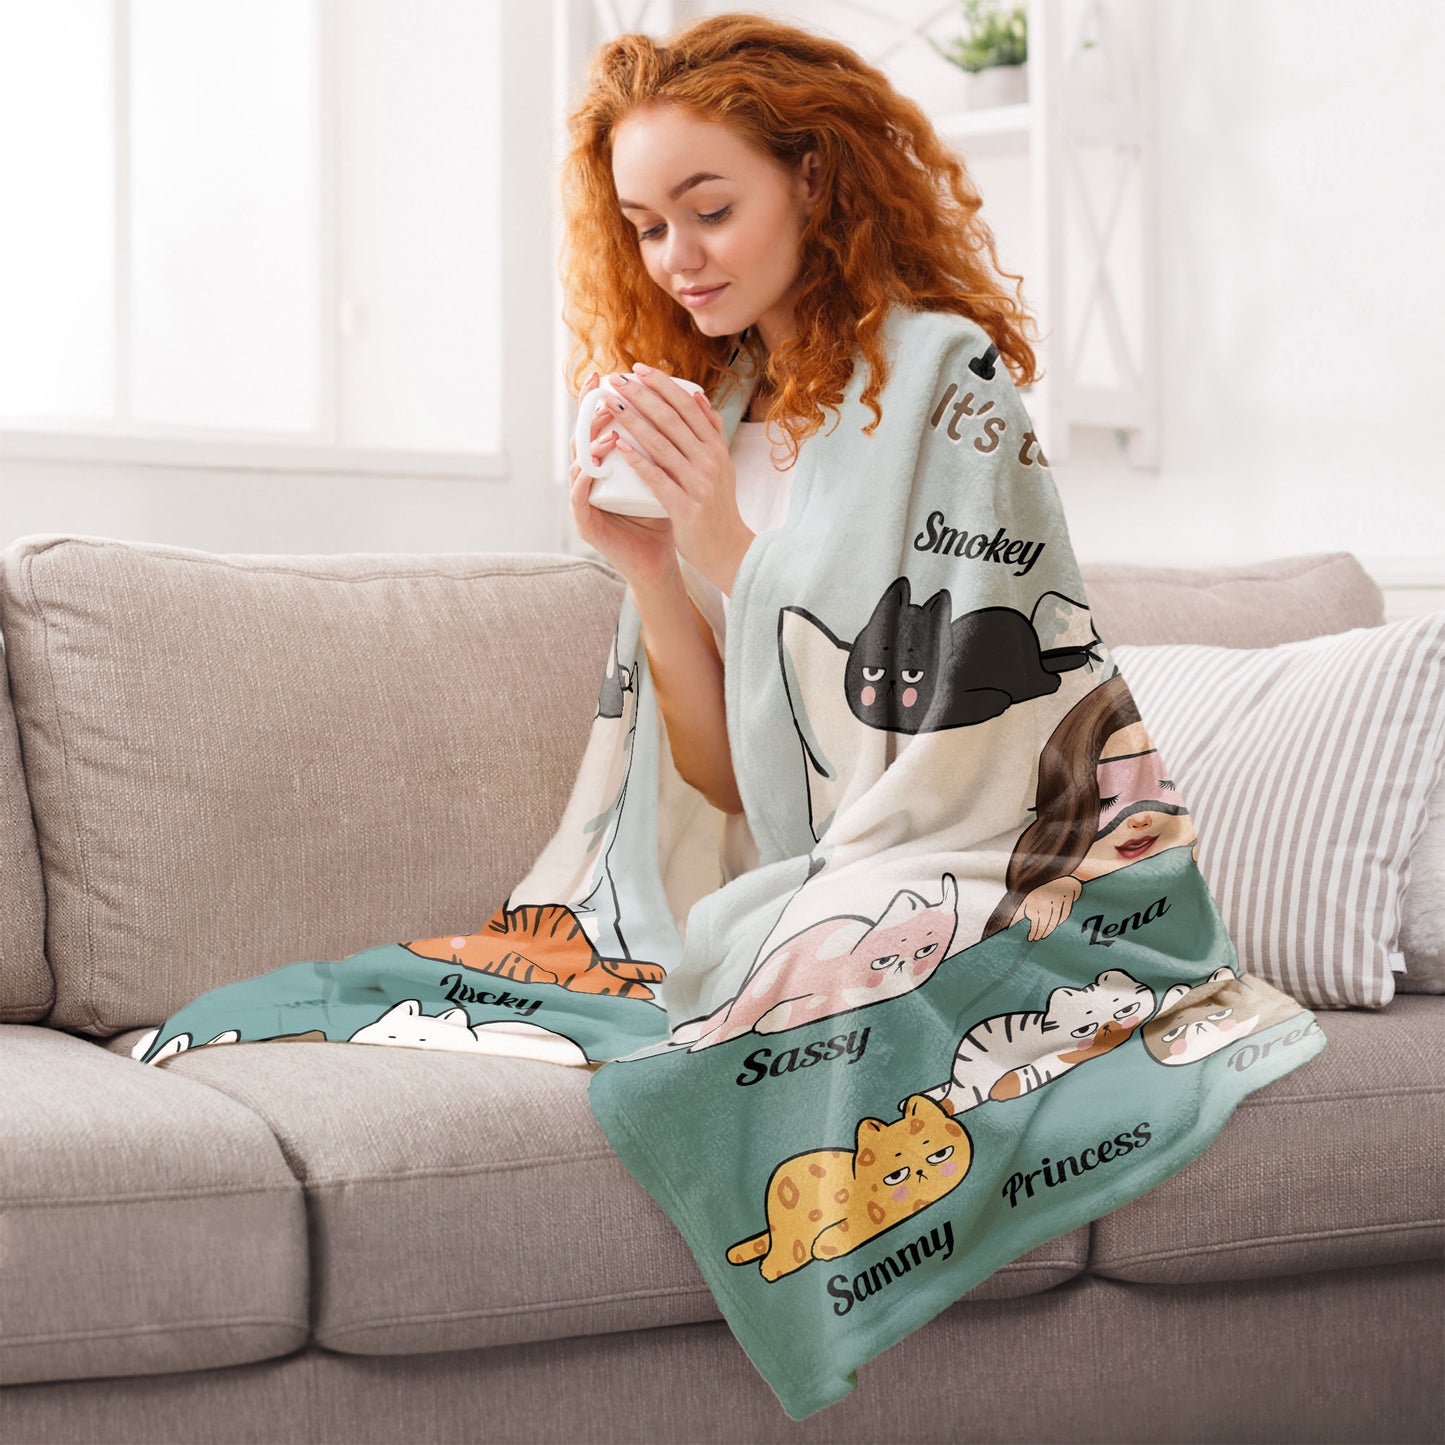 Stay In Bed With My Cats - Personalized Blanket - Birthday, Funny Gift For Cat Mom, Cat Lover